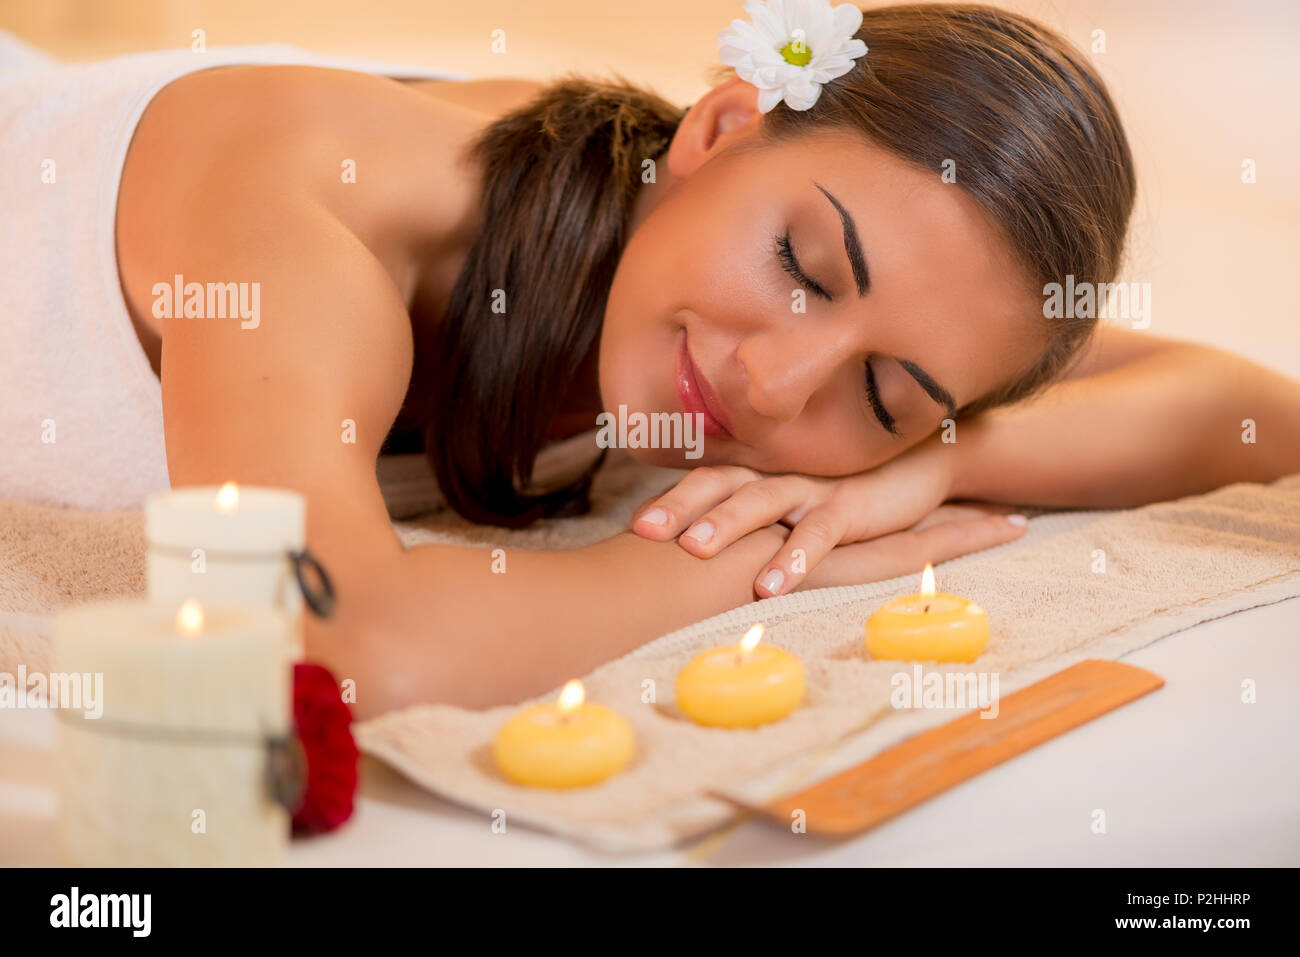 Cute young woman enjoying during a skin care treatment at a spa. Stock Photo